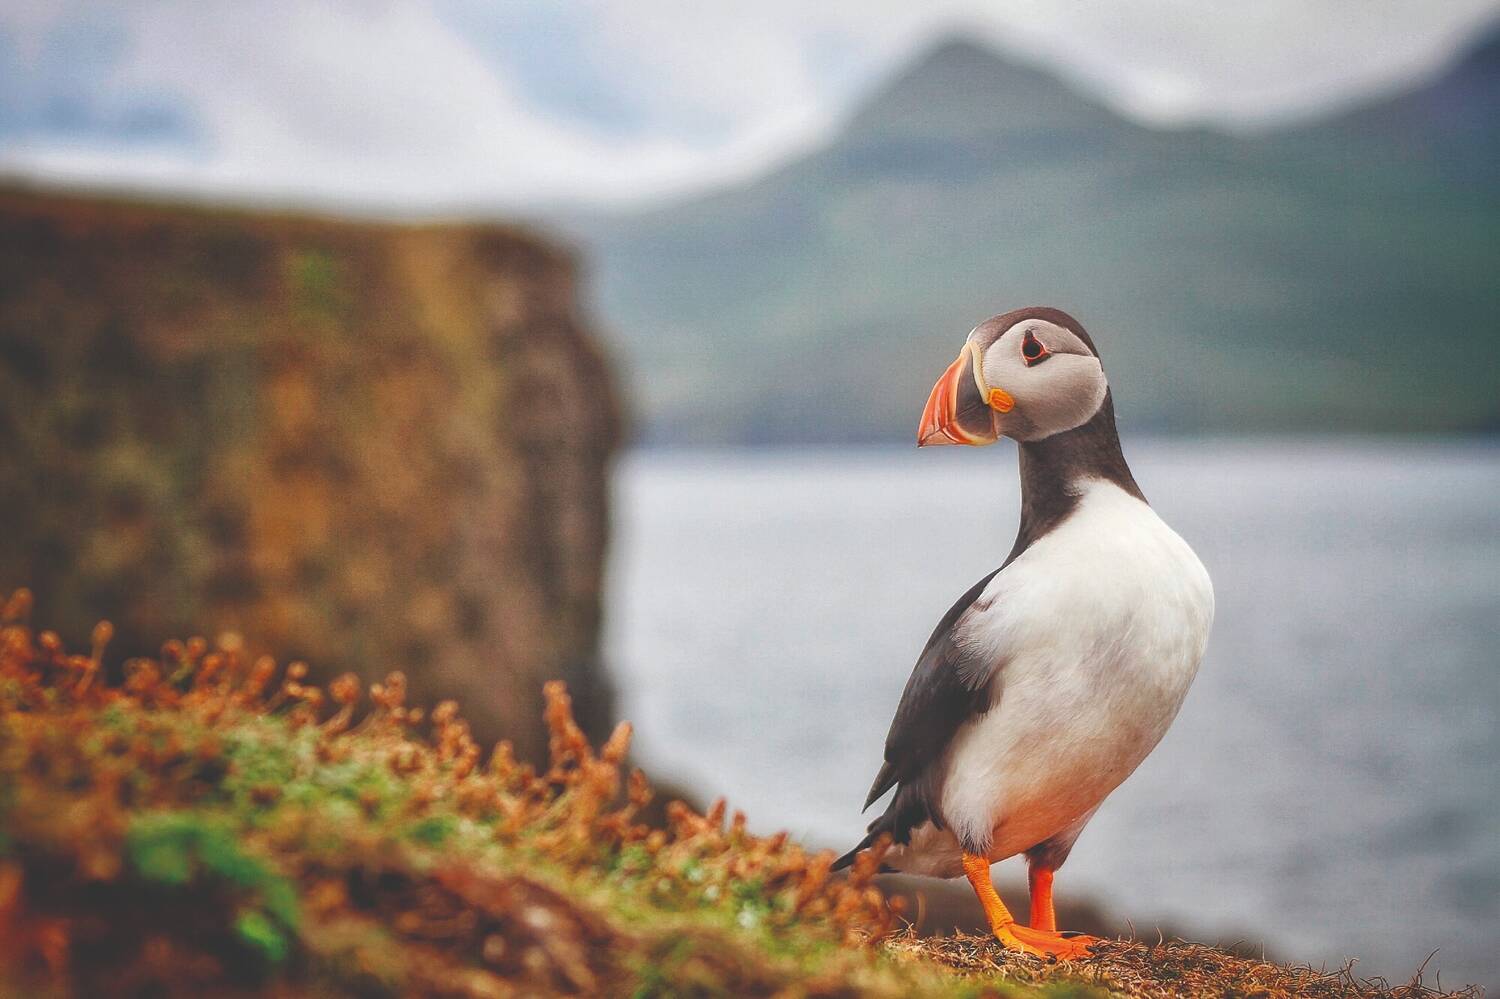 A puffin with a brightly coloured beak stands on a grassy slope on an island.